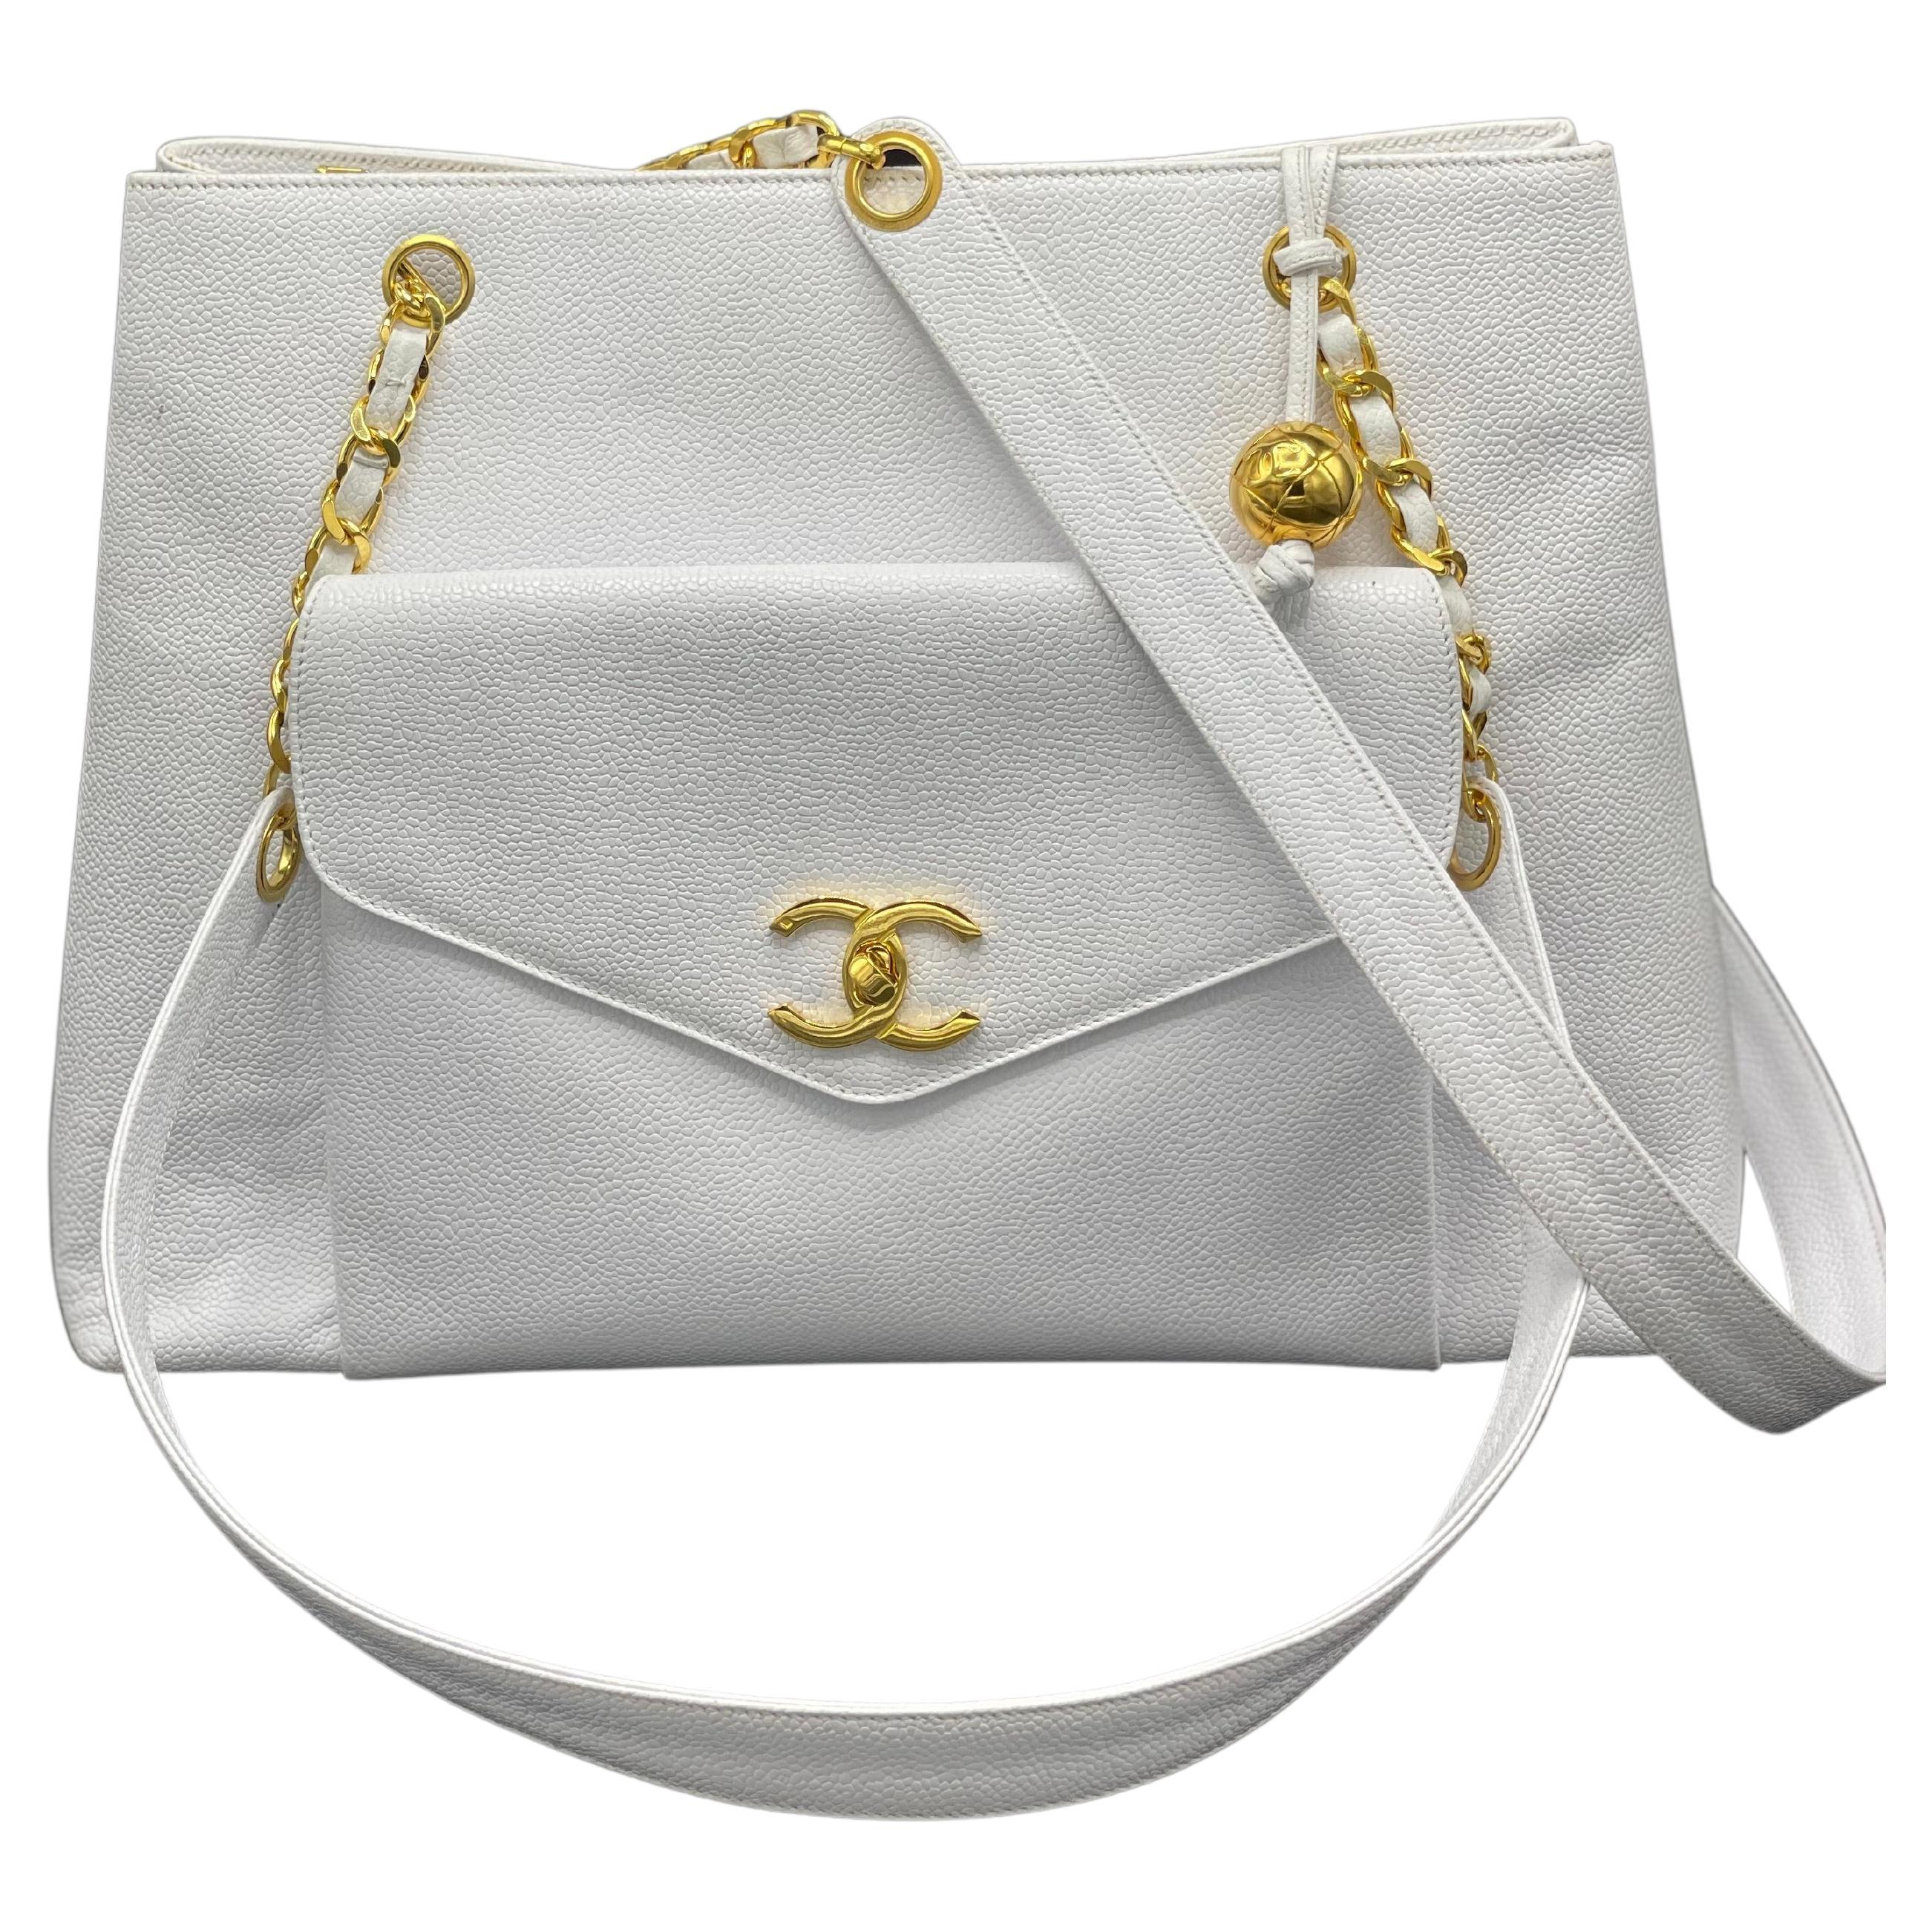 Chanel White Caviar Leather Front Pocket Tote Bag